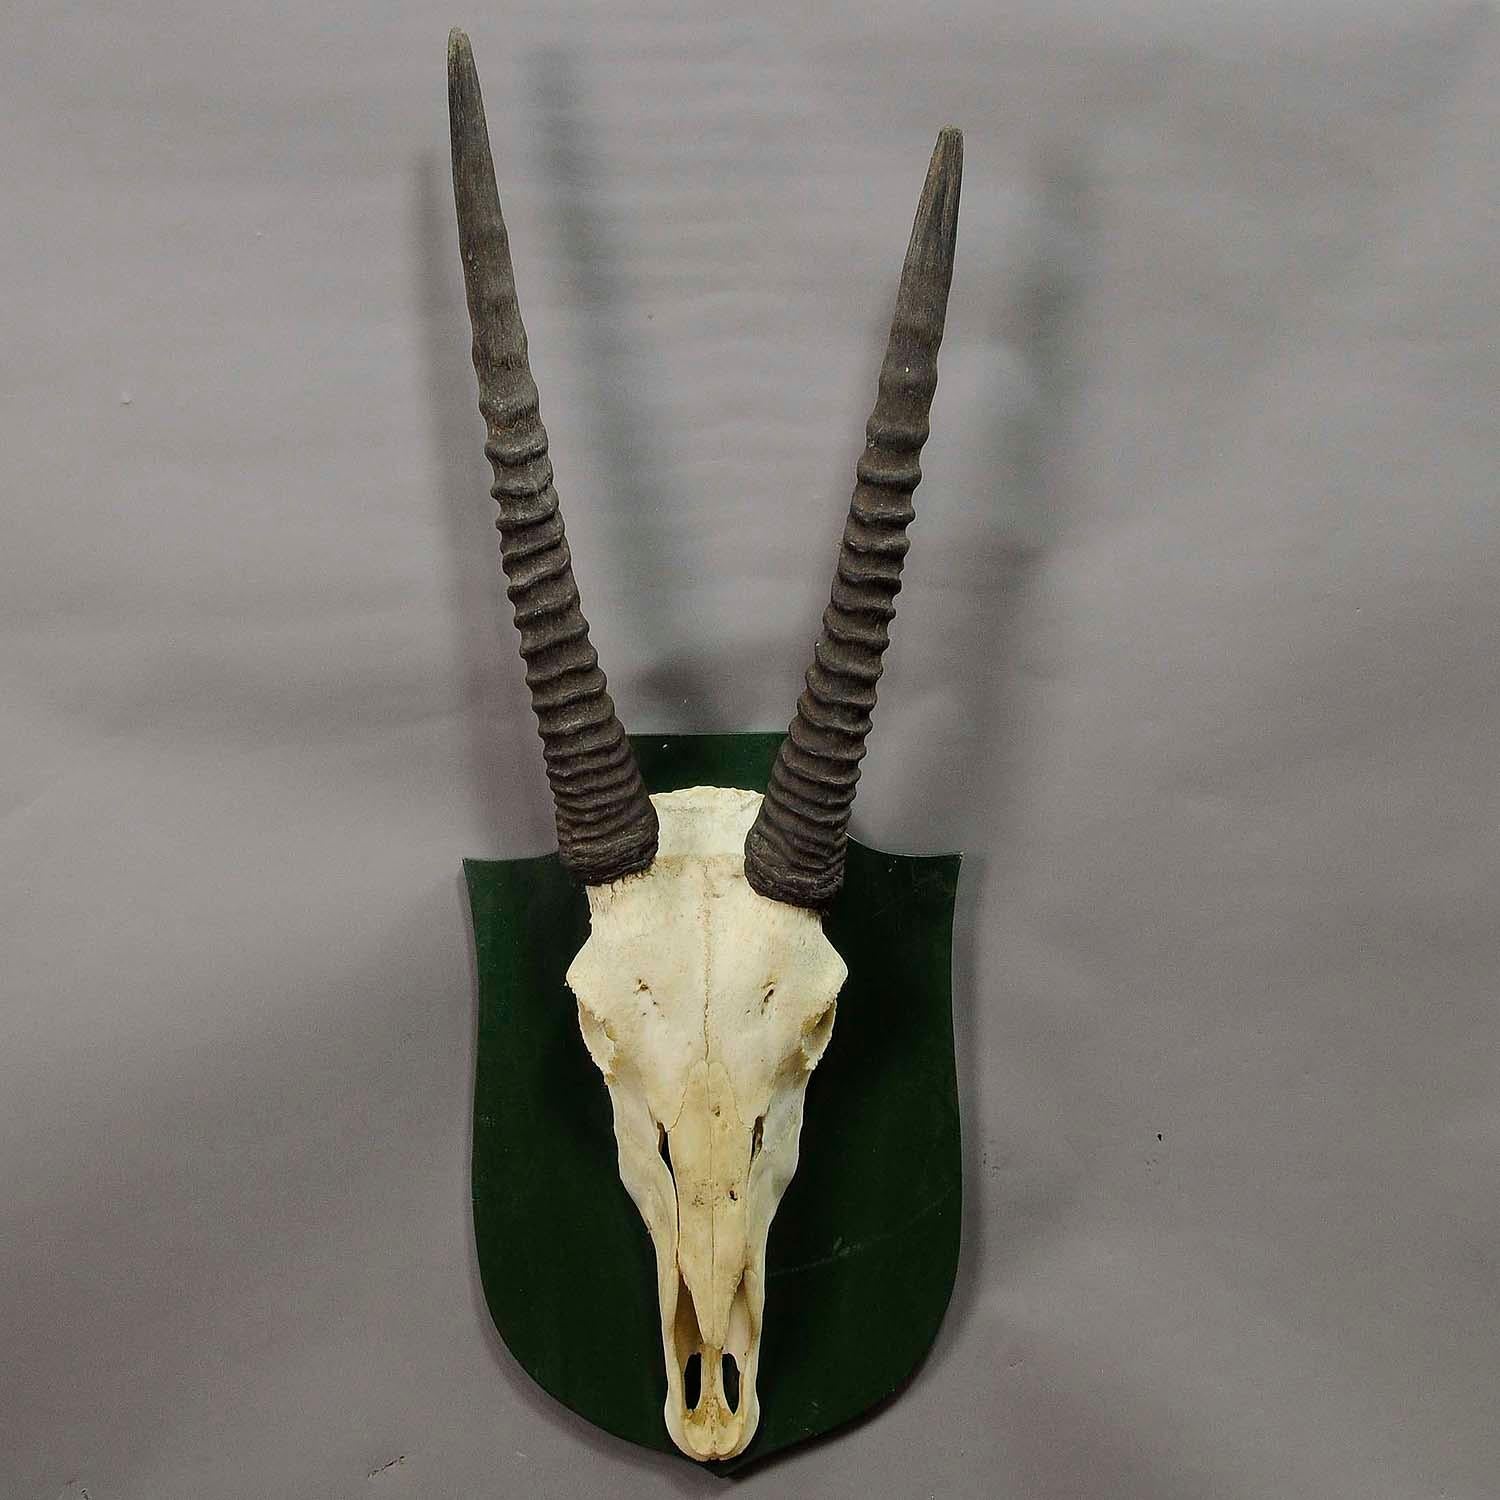 A great antique trophy of an oryx anthelope on wooden plaque. Remaining from the stately home of palace salem in south germany. Shot by a member of the family of margrave maximilian of baden.

Measures: width 12.6